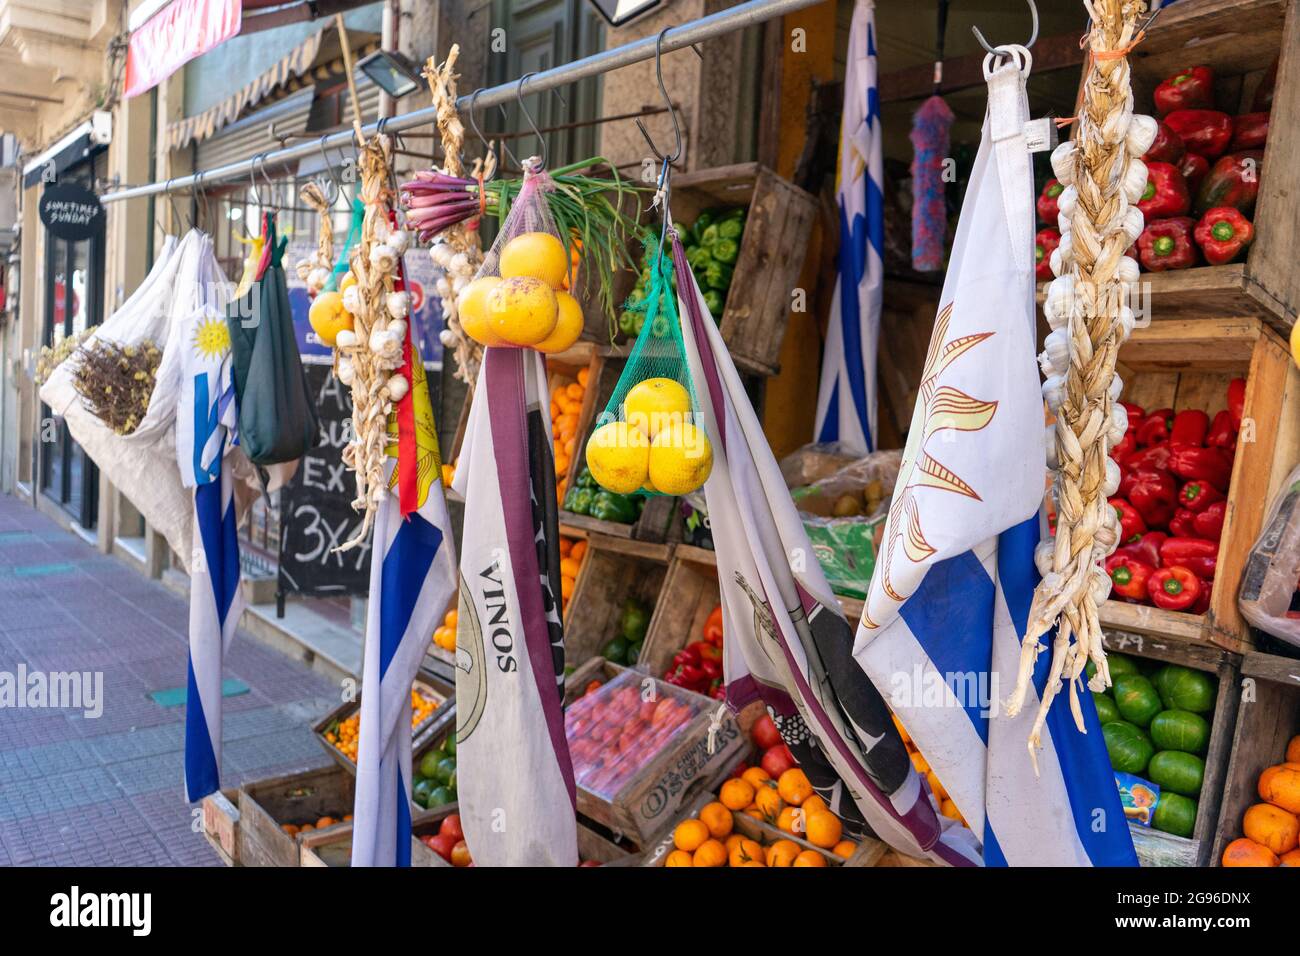 Street Market Selling Fruits, Vegetable and Produce. Montevideo, Uruguay Stock Photo